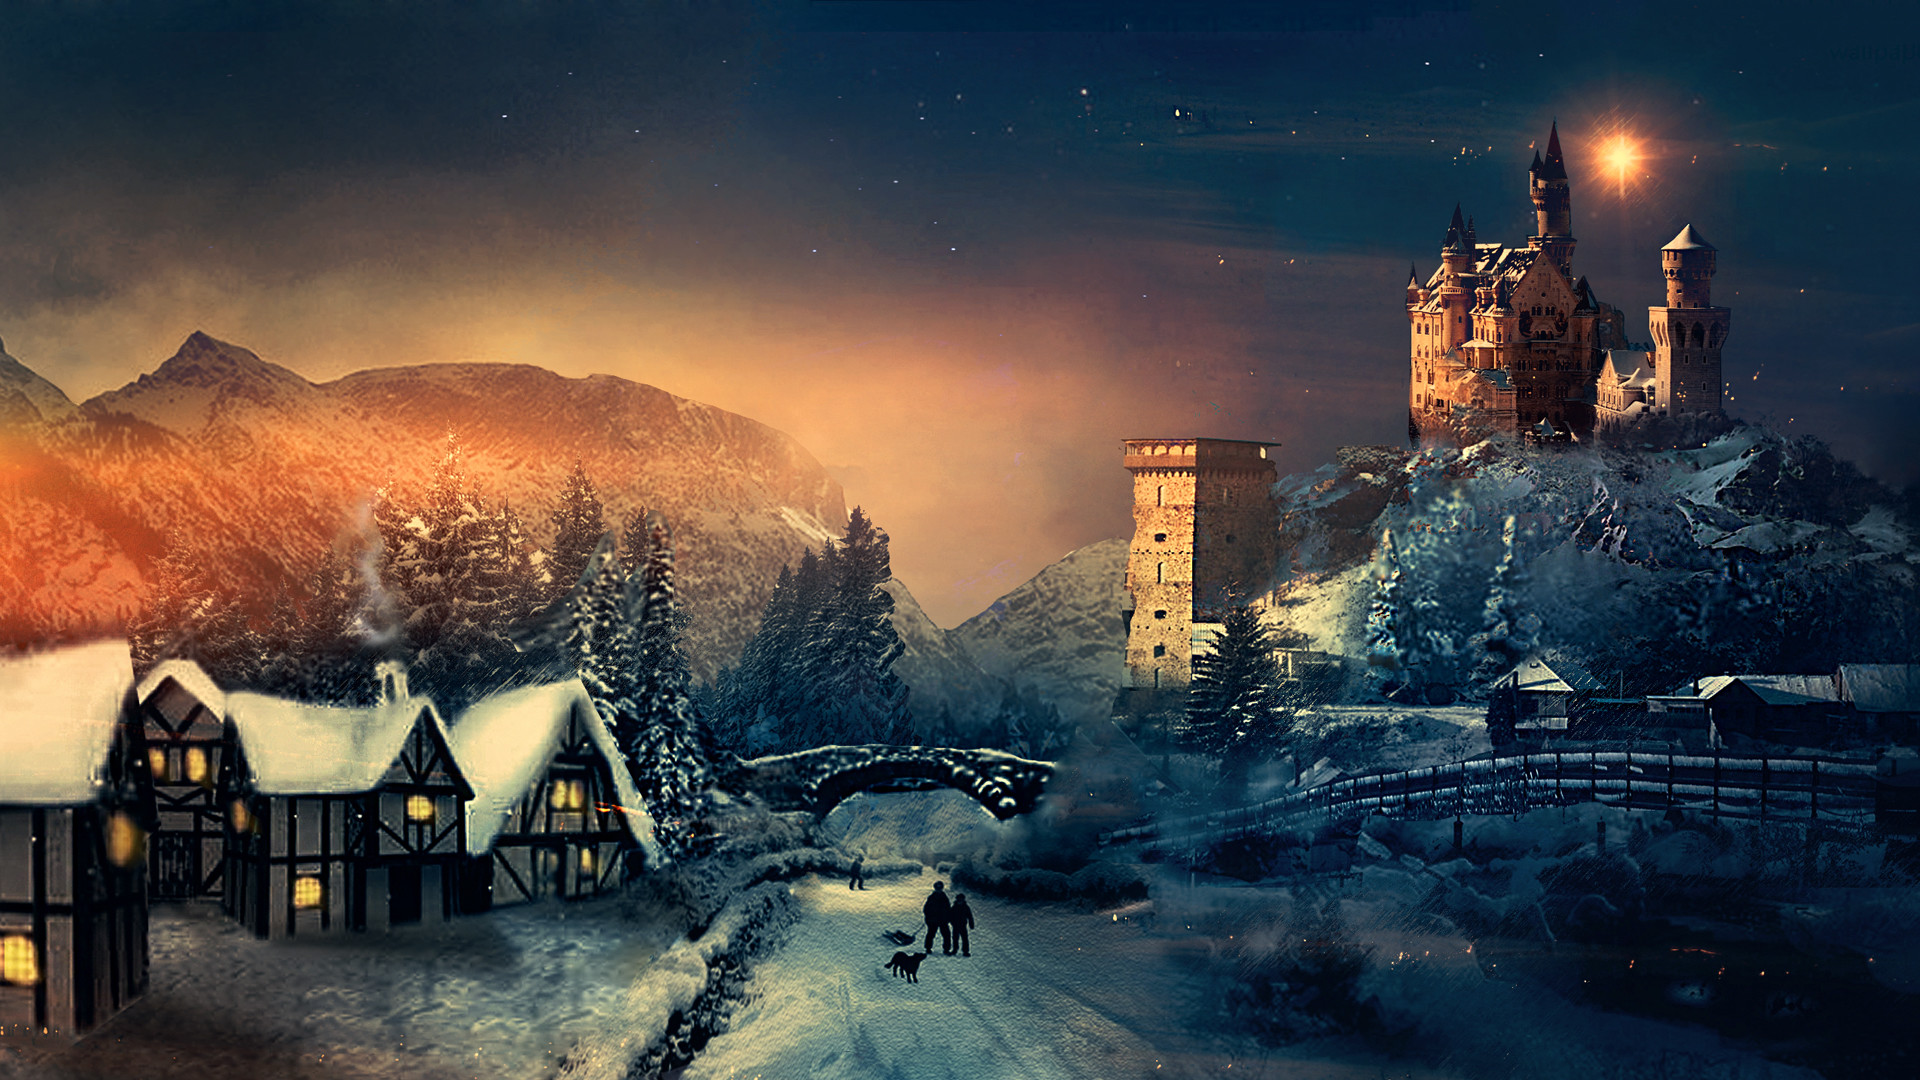 1920x1080 The Best Christmas Wallpapers to Download